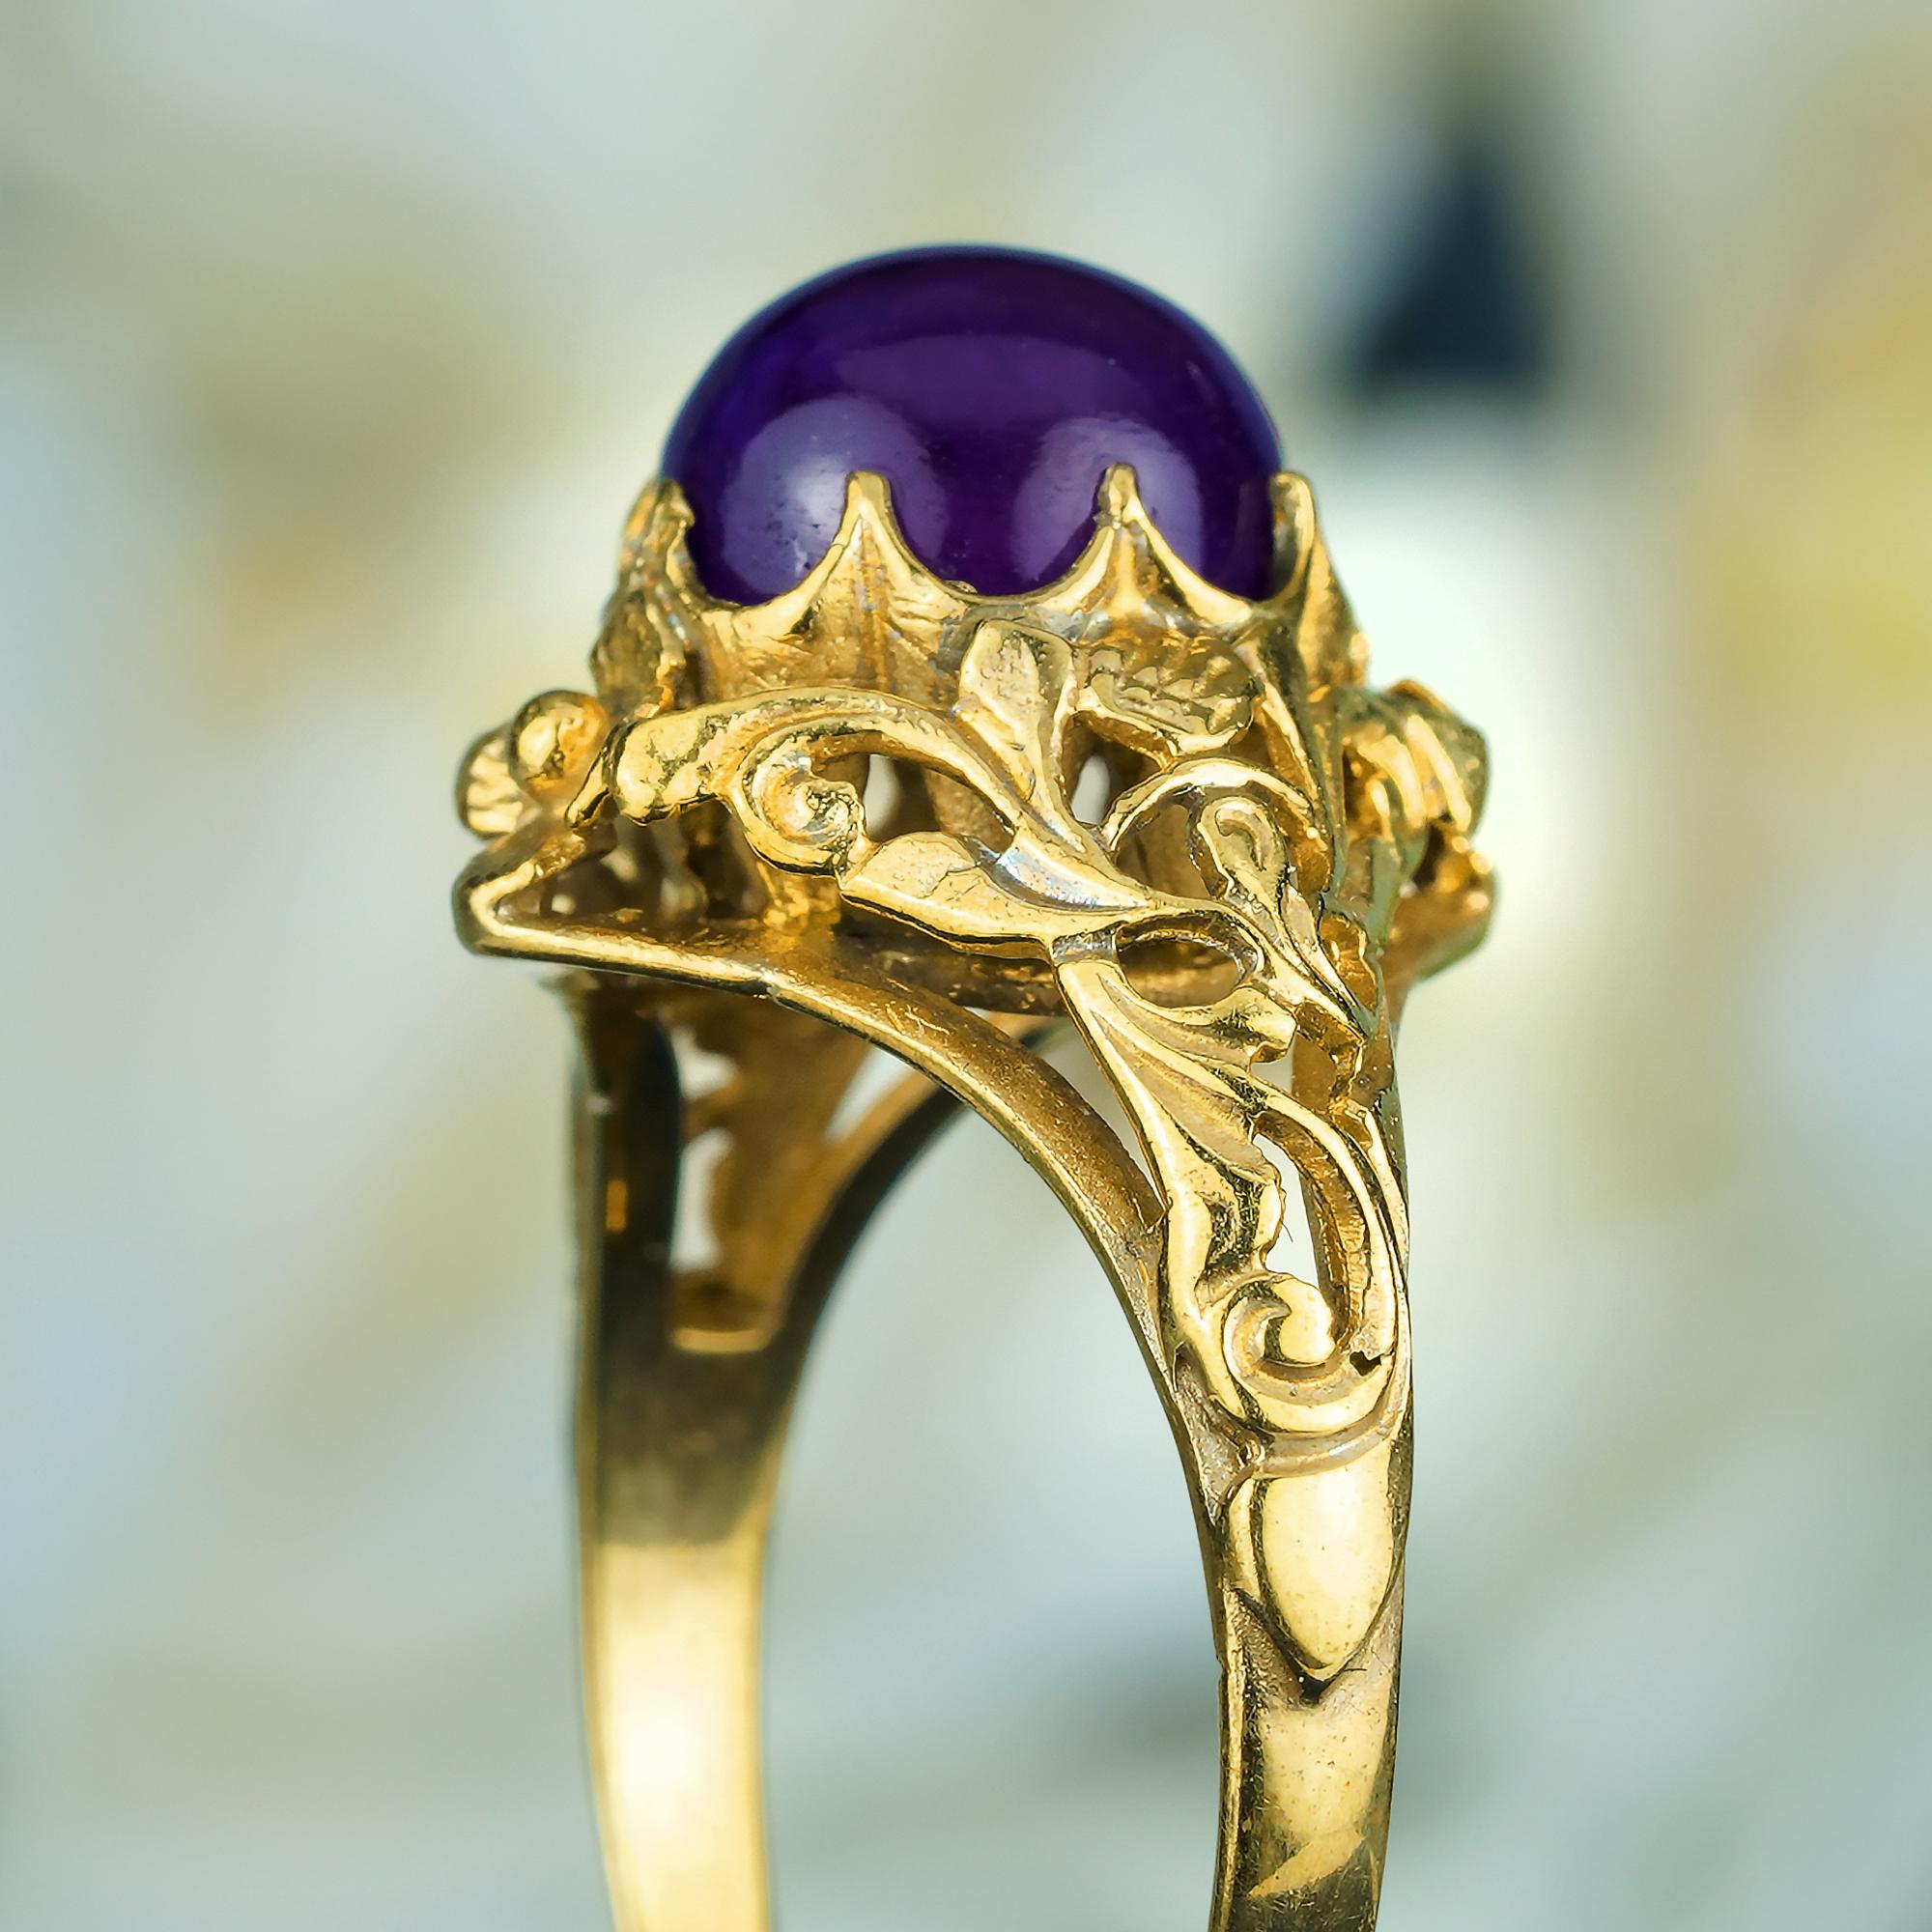 For Sale:  Natural Cabochon Amethyst Vintage Style Filigree Ring in Solid 9K Yellow Gold 6